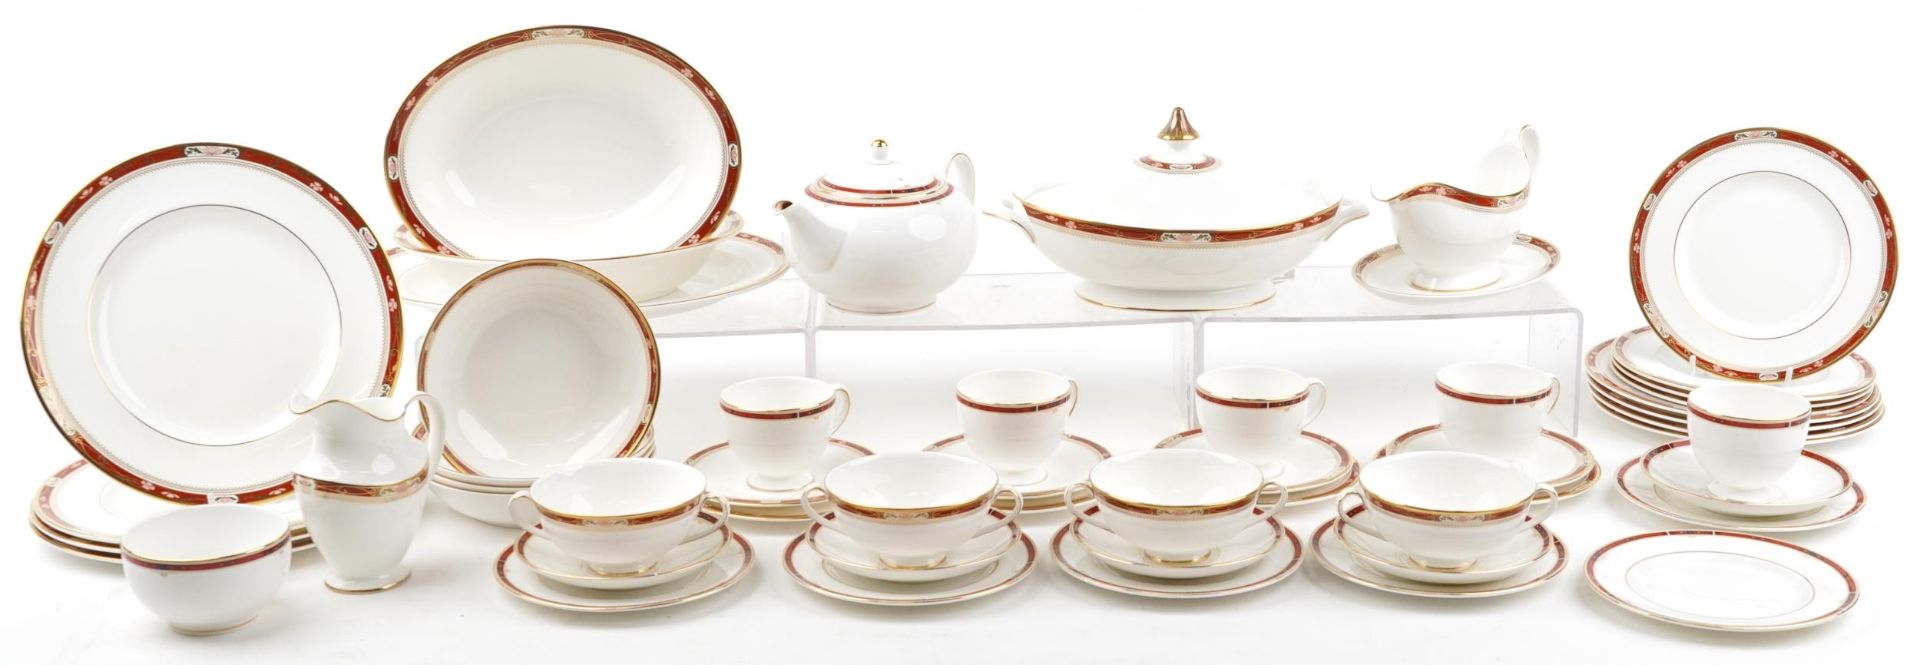 Wedgwood and Royal Doulton Sandon dinner and teaware including teapot, lidded tureen, cups and